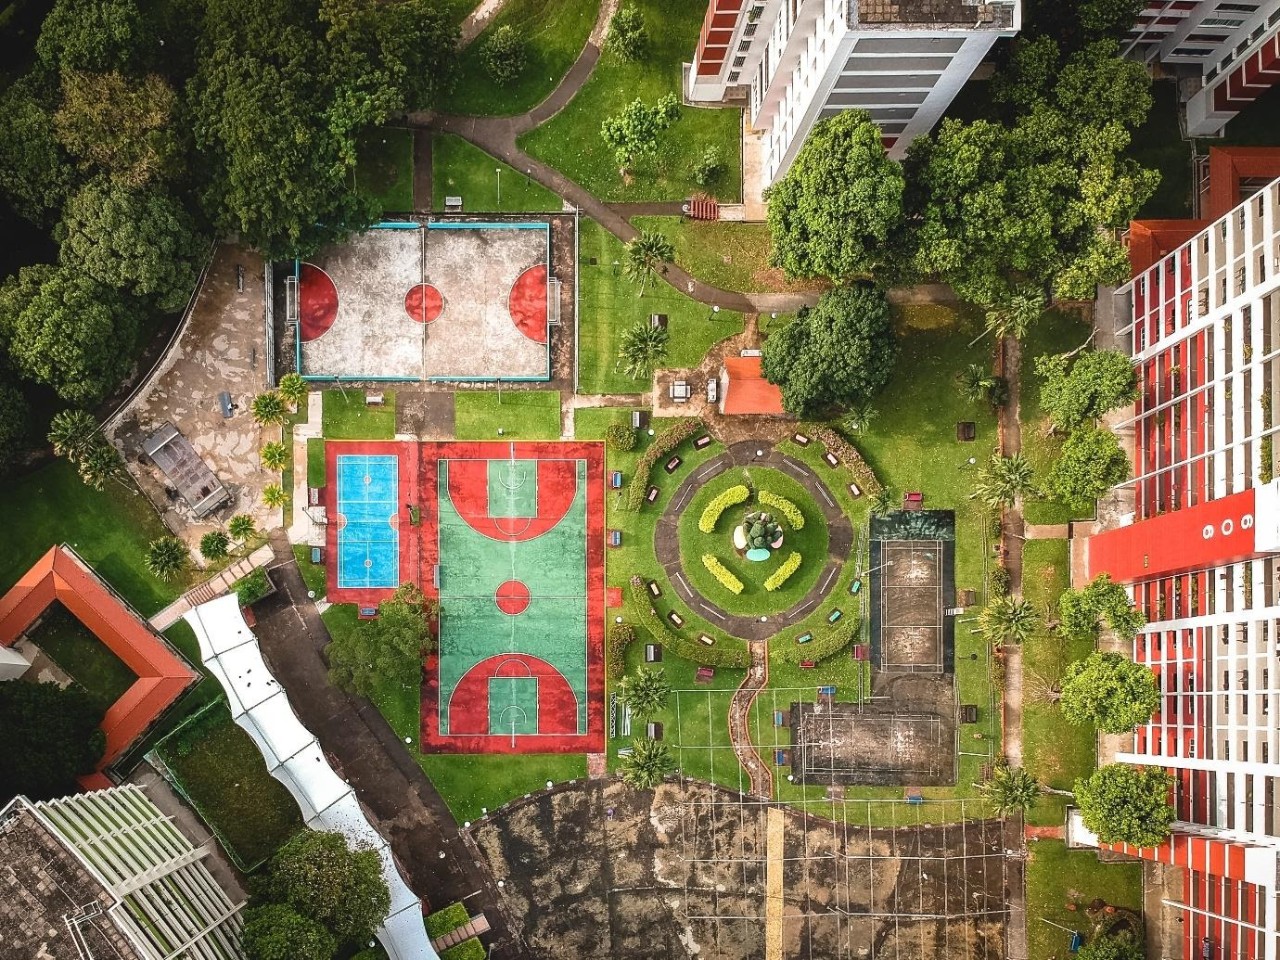 A photo showing top down view of Blk 606 Bedok Reservoir Rd recreational space